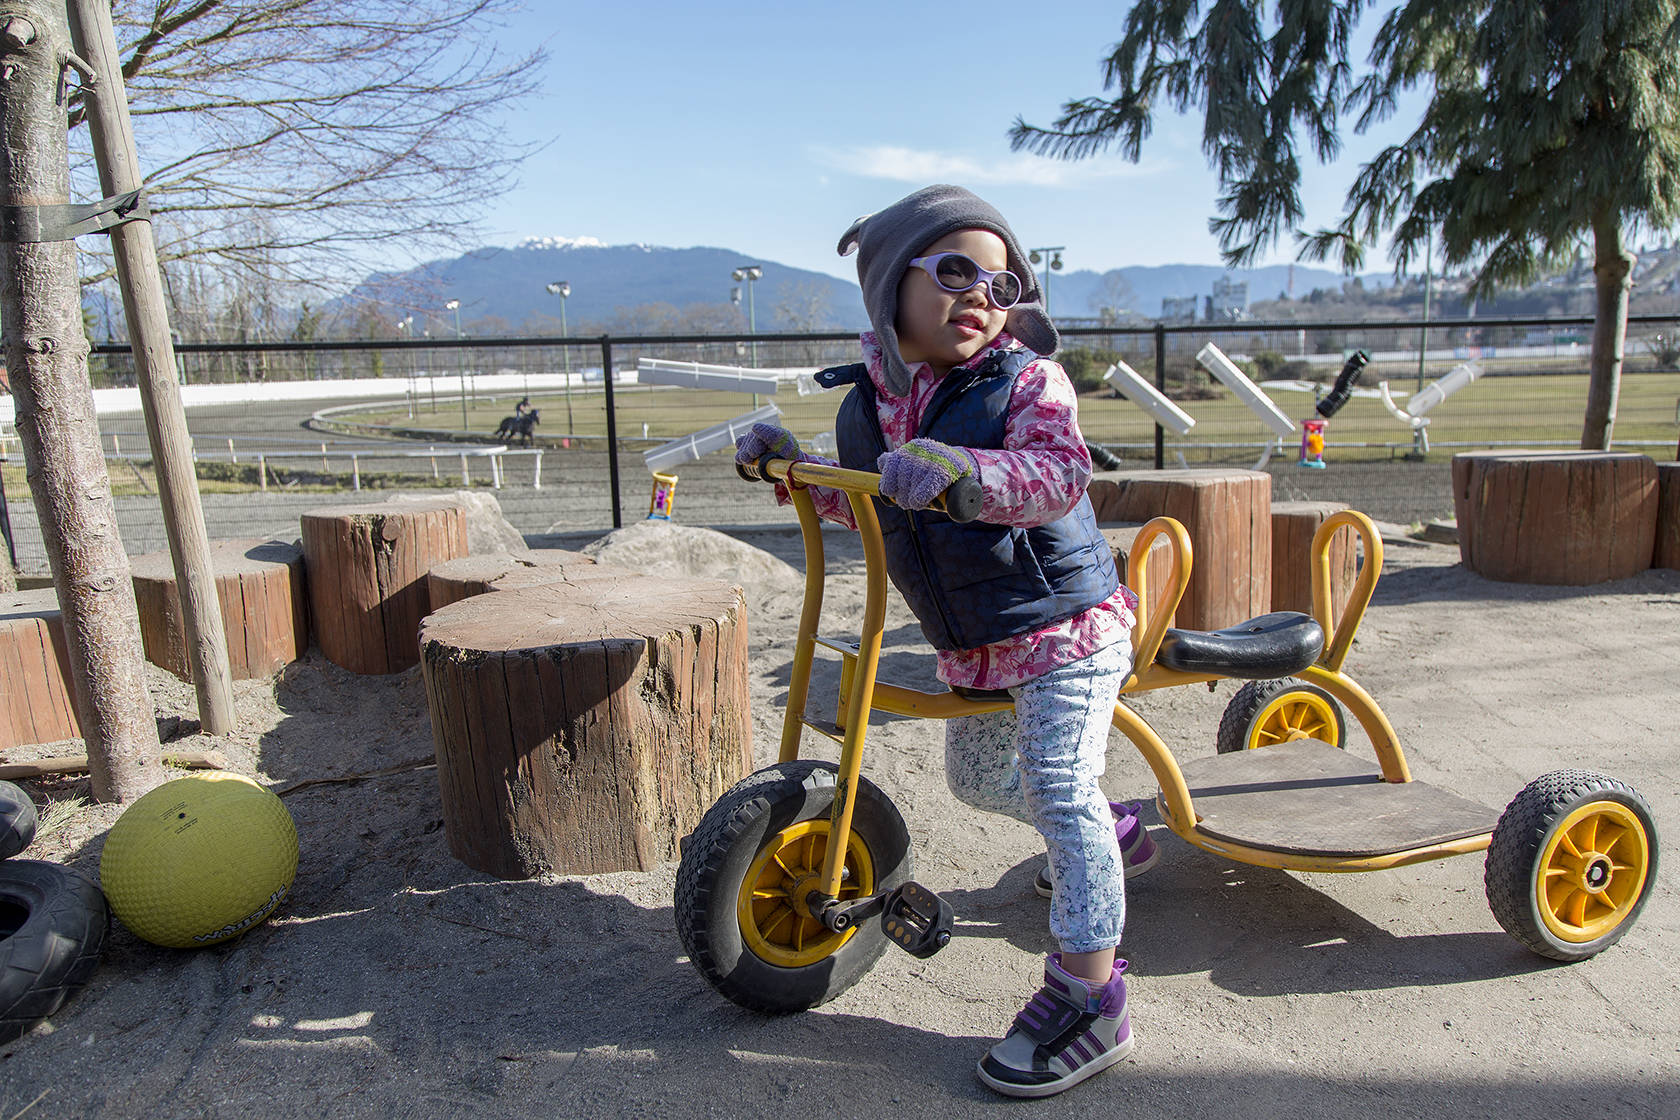 Vivian, one of many cared for at a child care center of the Kiwassa Neighbourhood House in Vancouver, B.C., spends the day outside on a tricycle on March 21. The site was awarded prototype status by the government of British Columbia as part of an effort to ease skyrocketing child care costs in the province. Ashley Hiruko/staff photo